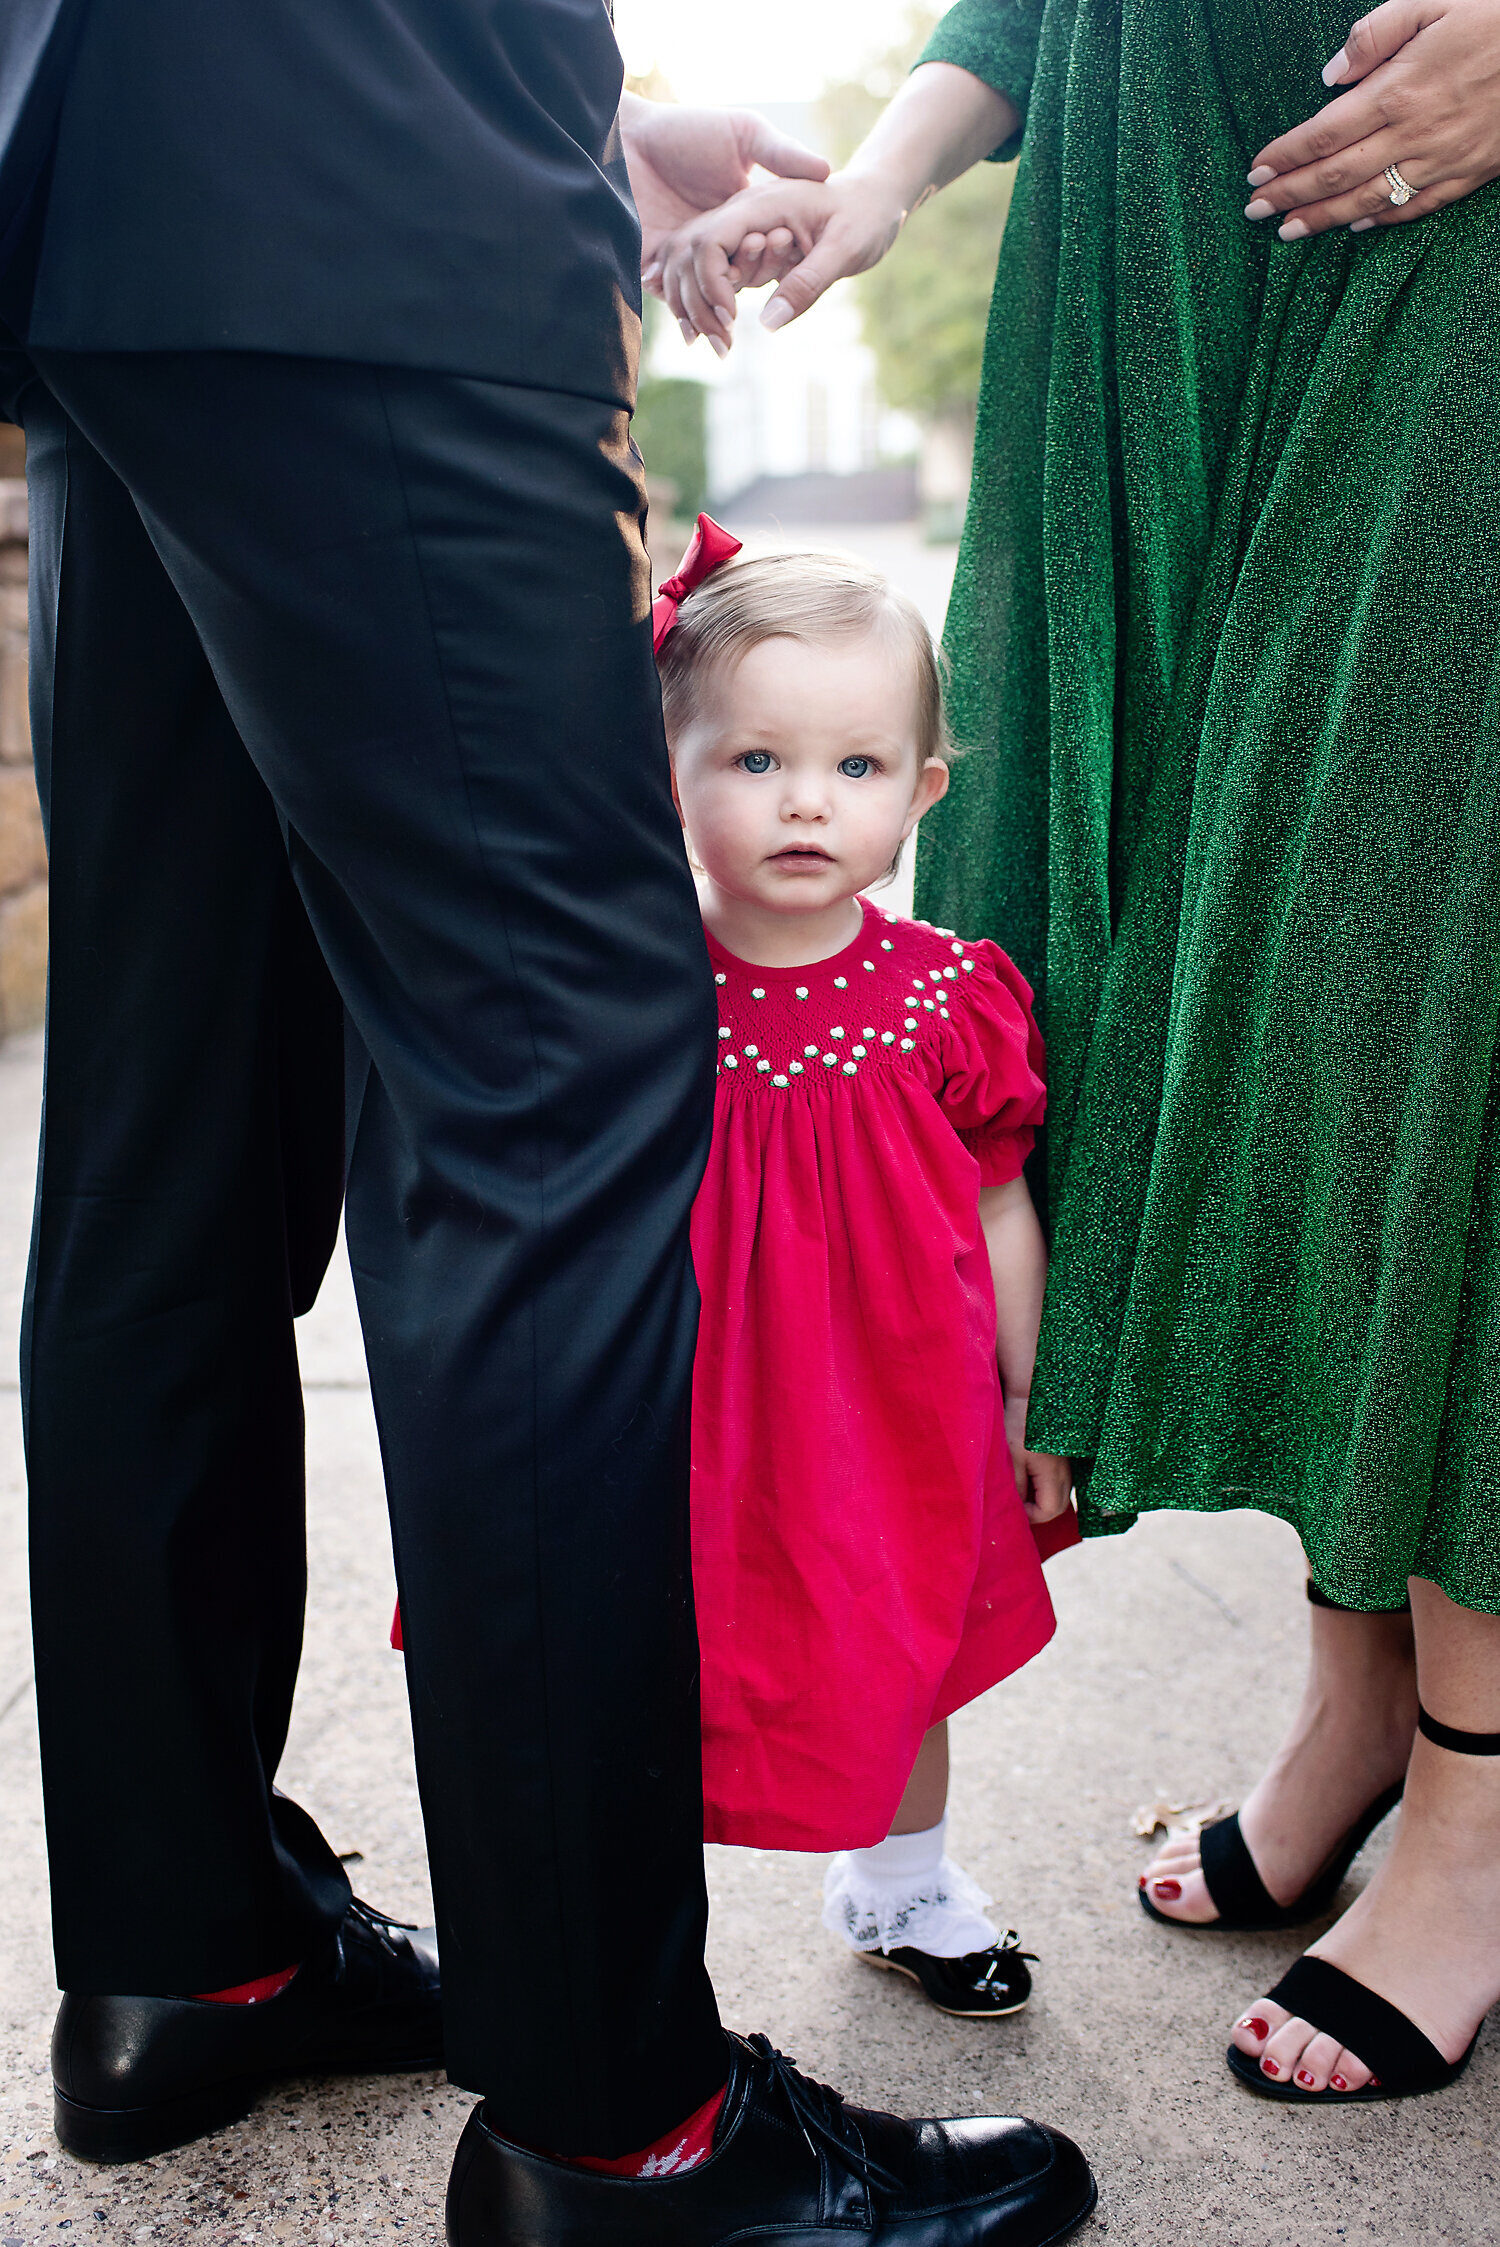 A young girl in a red dress standing between her parents and looking directly at the camera.